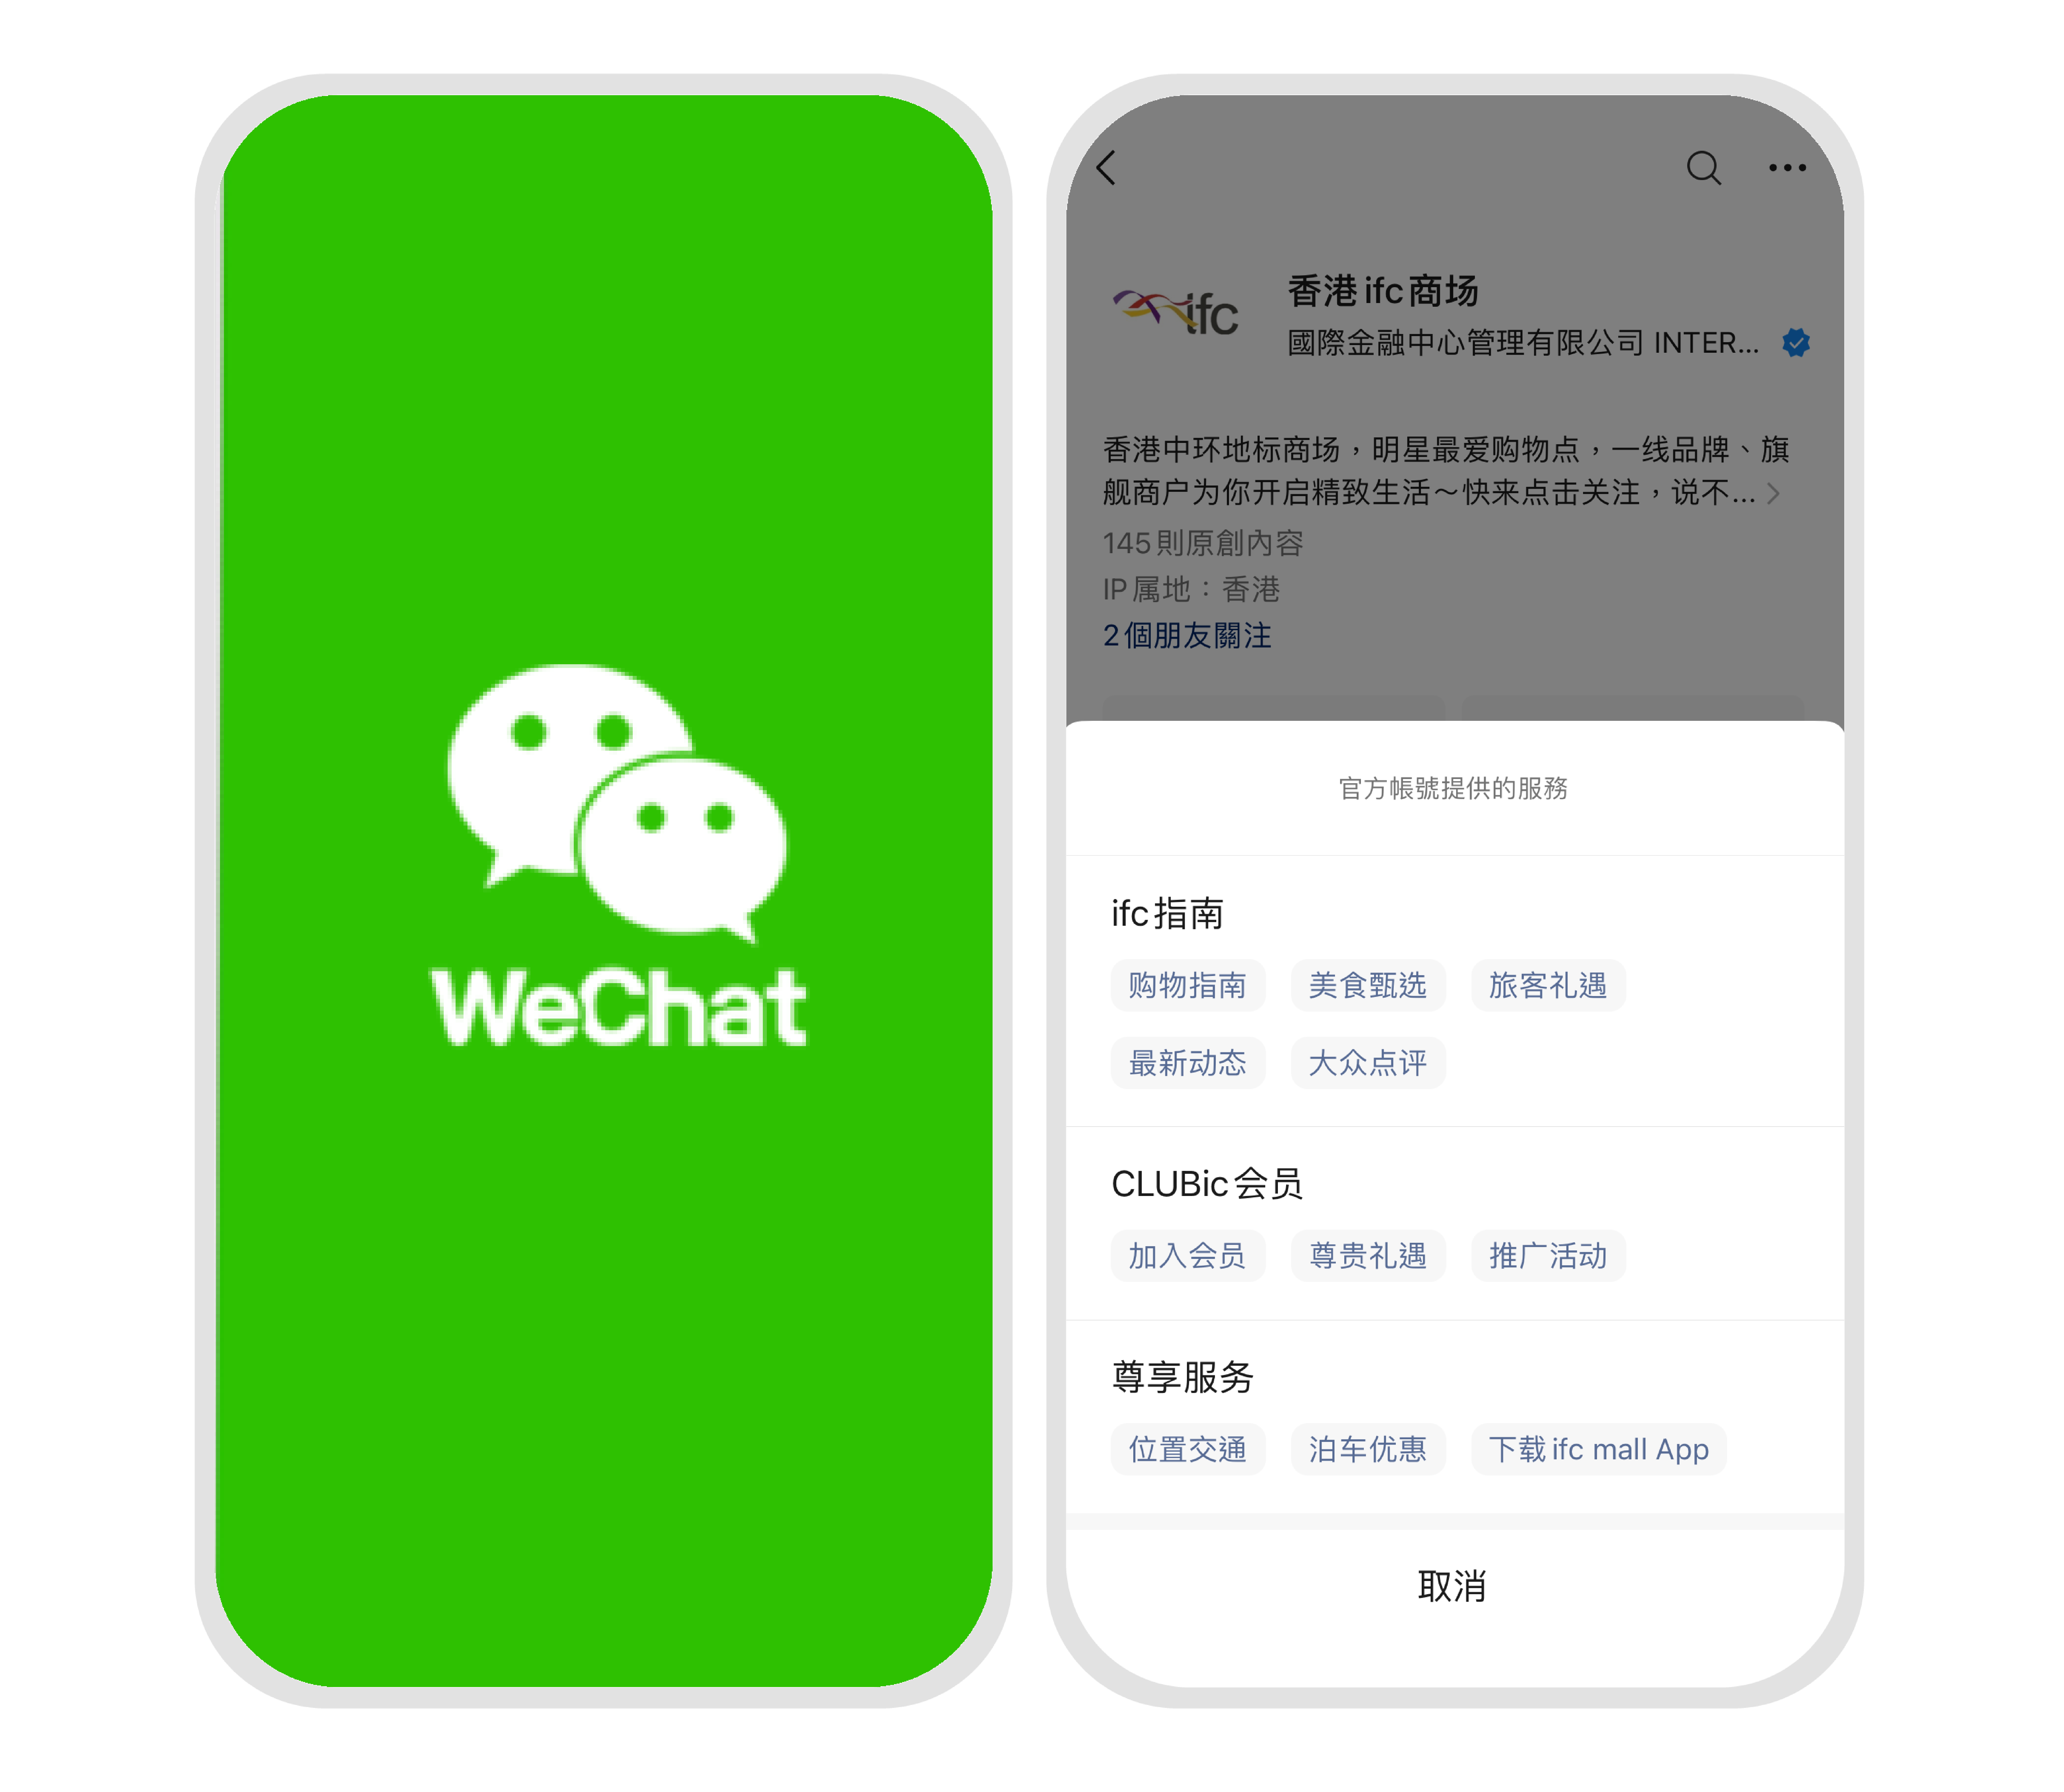 WeChat Business Account Application and Setup